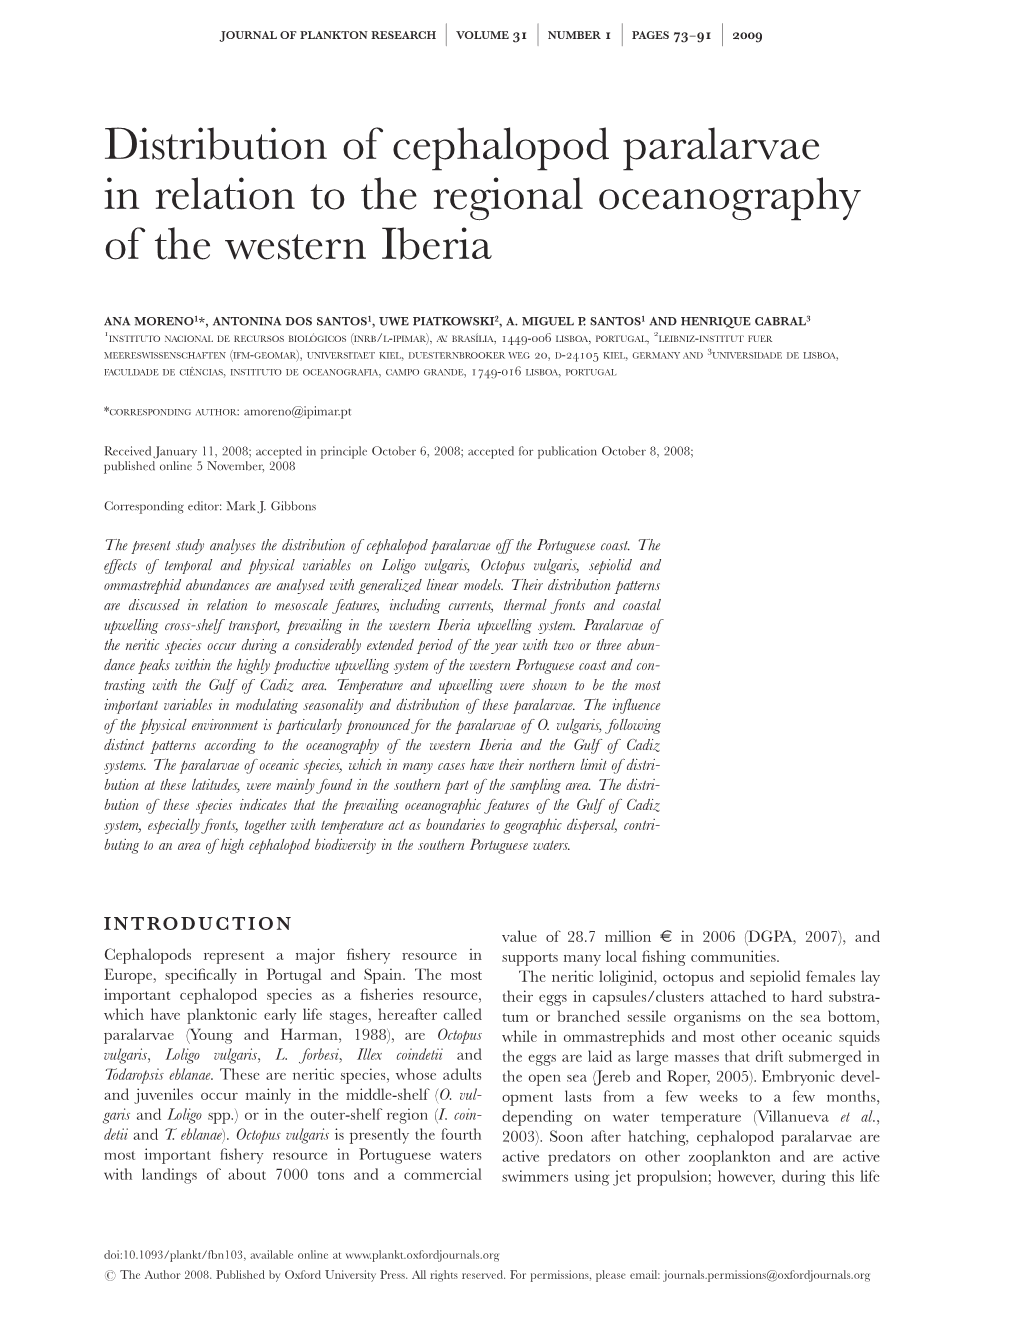 Distribution of Cephalopod Paralarvae in Relation to the Regional Oceanography of the Western Iberia